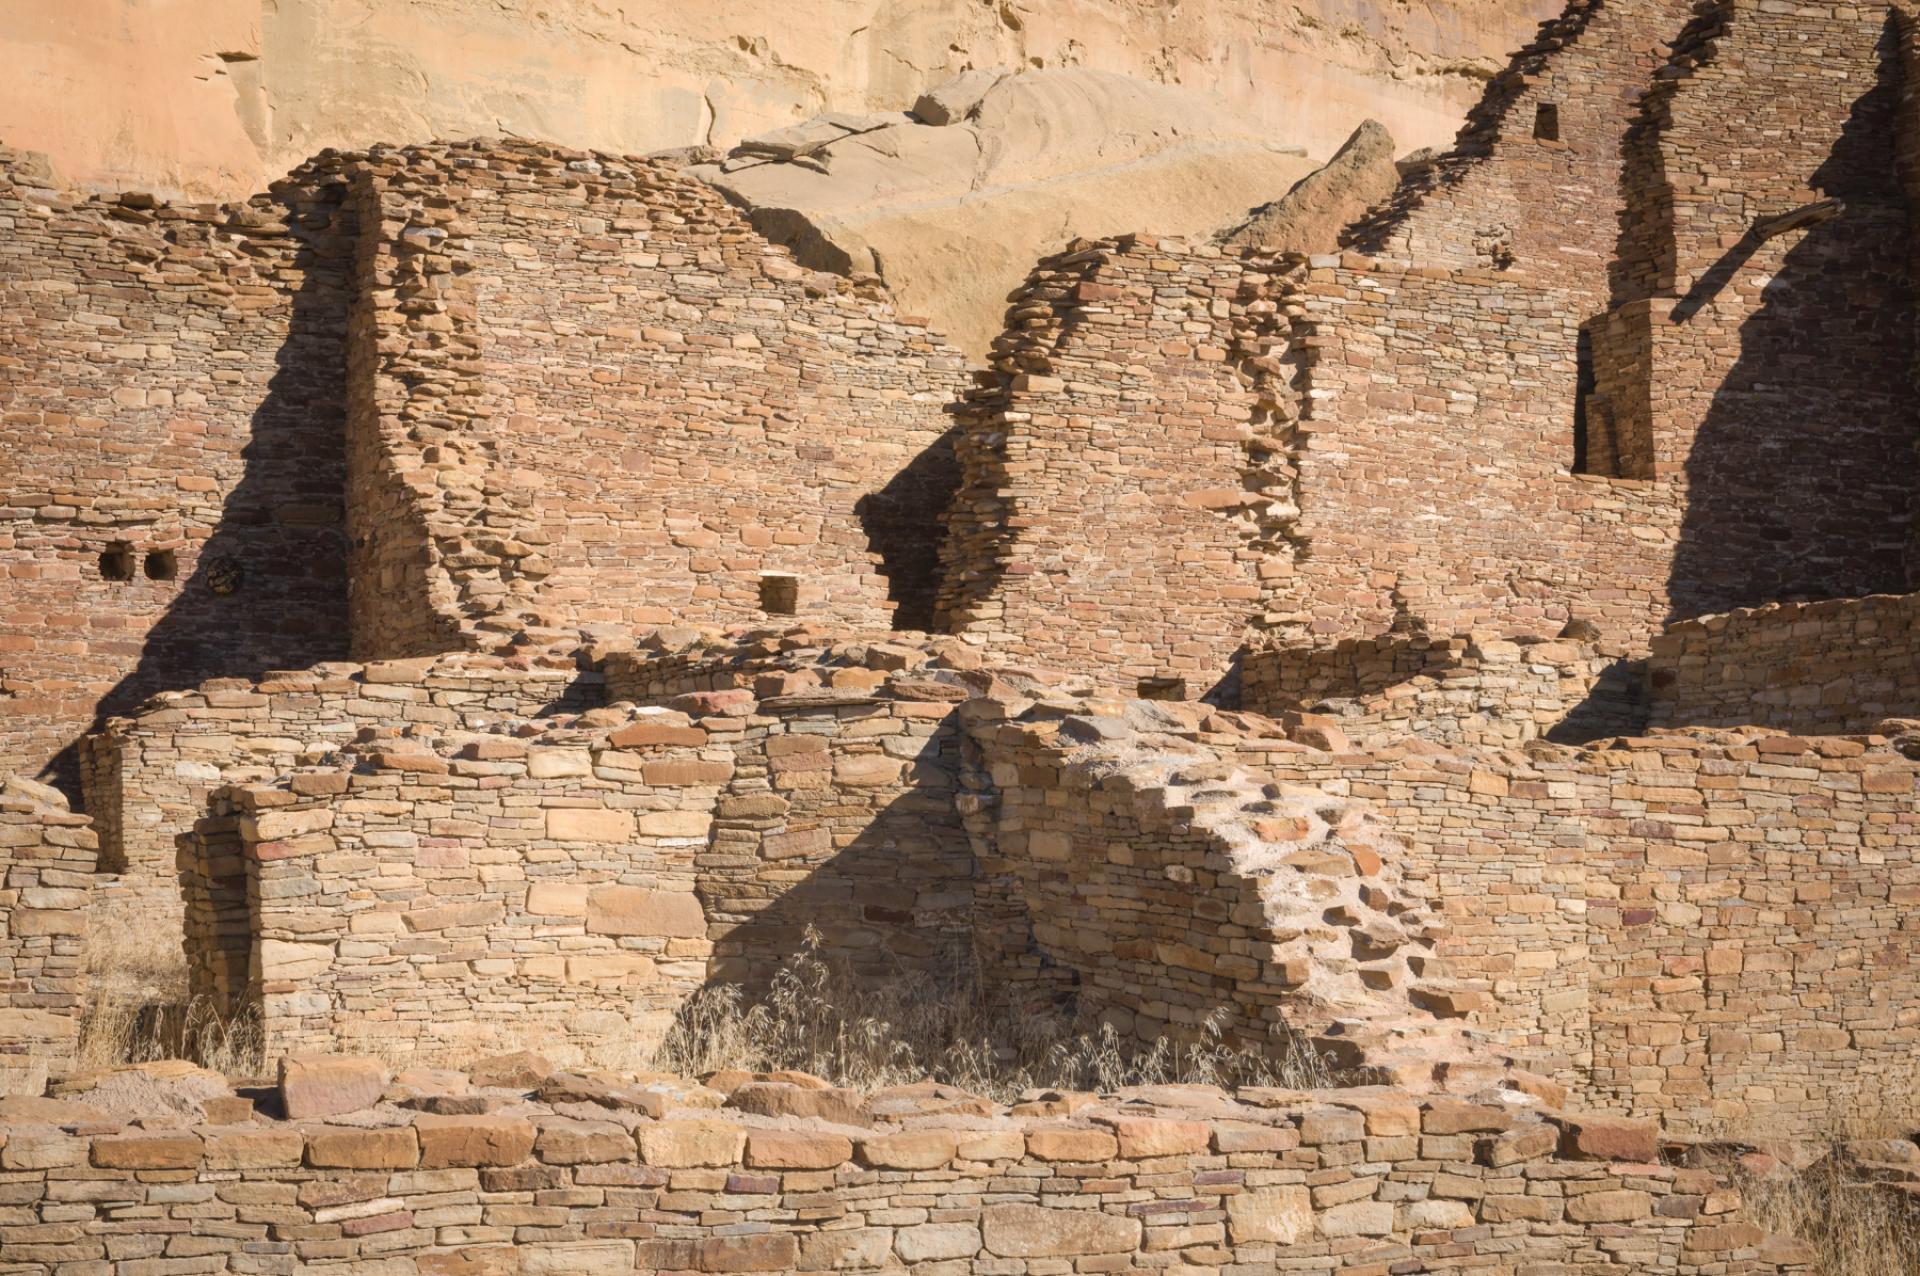 Chaco Canyon National Historical Park, New Mexico